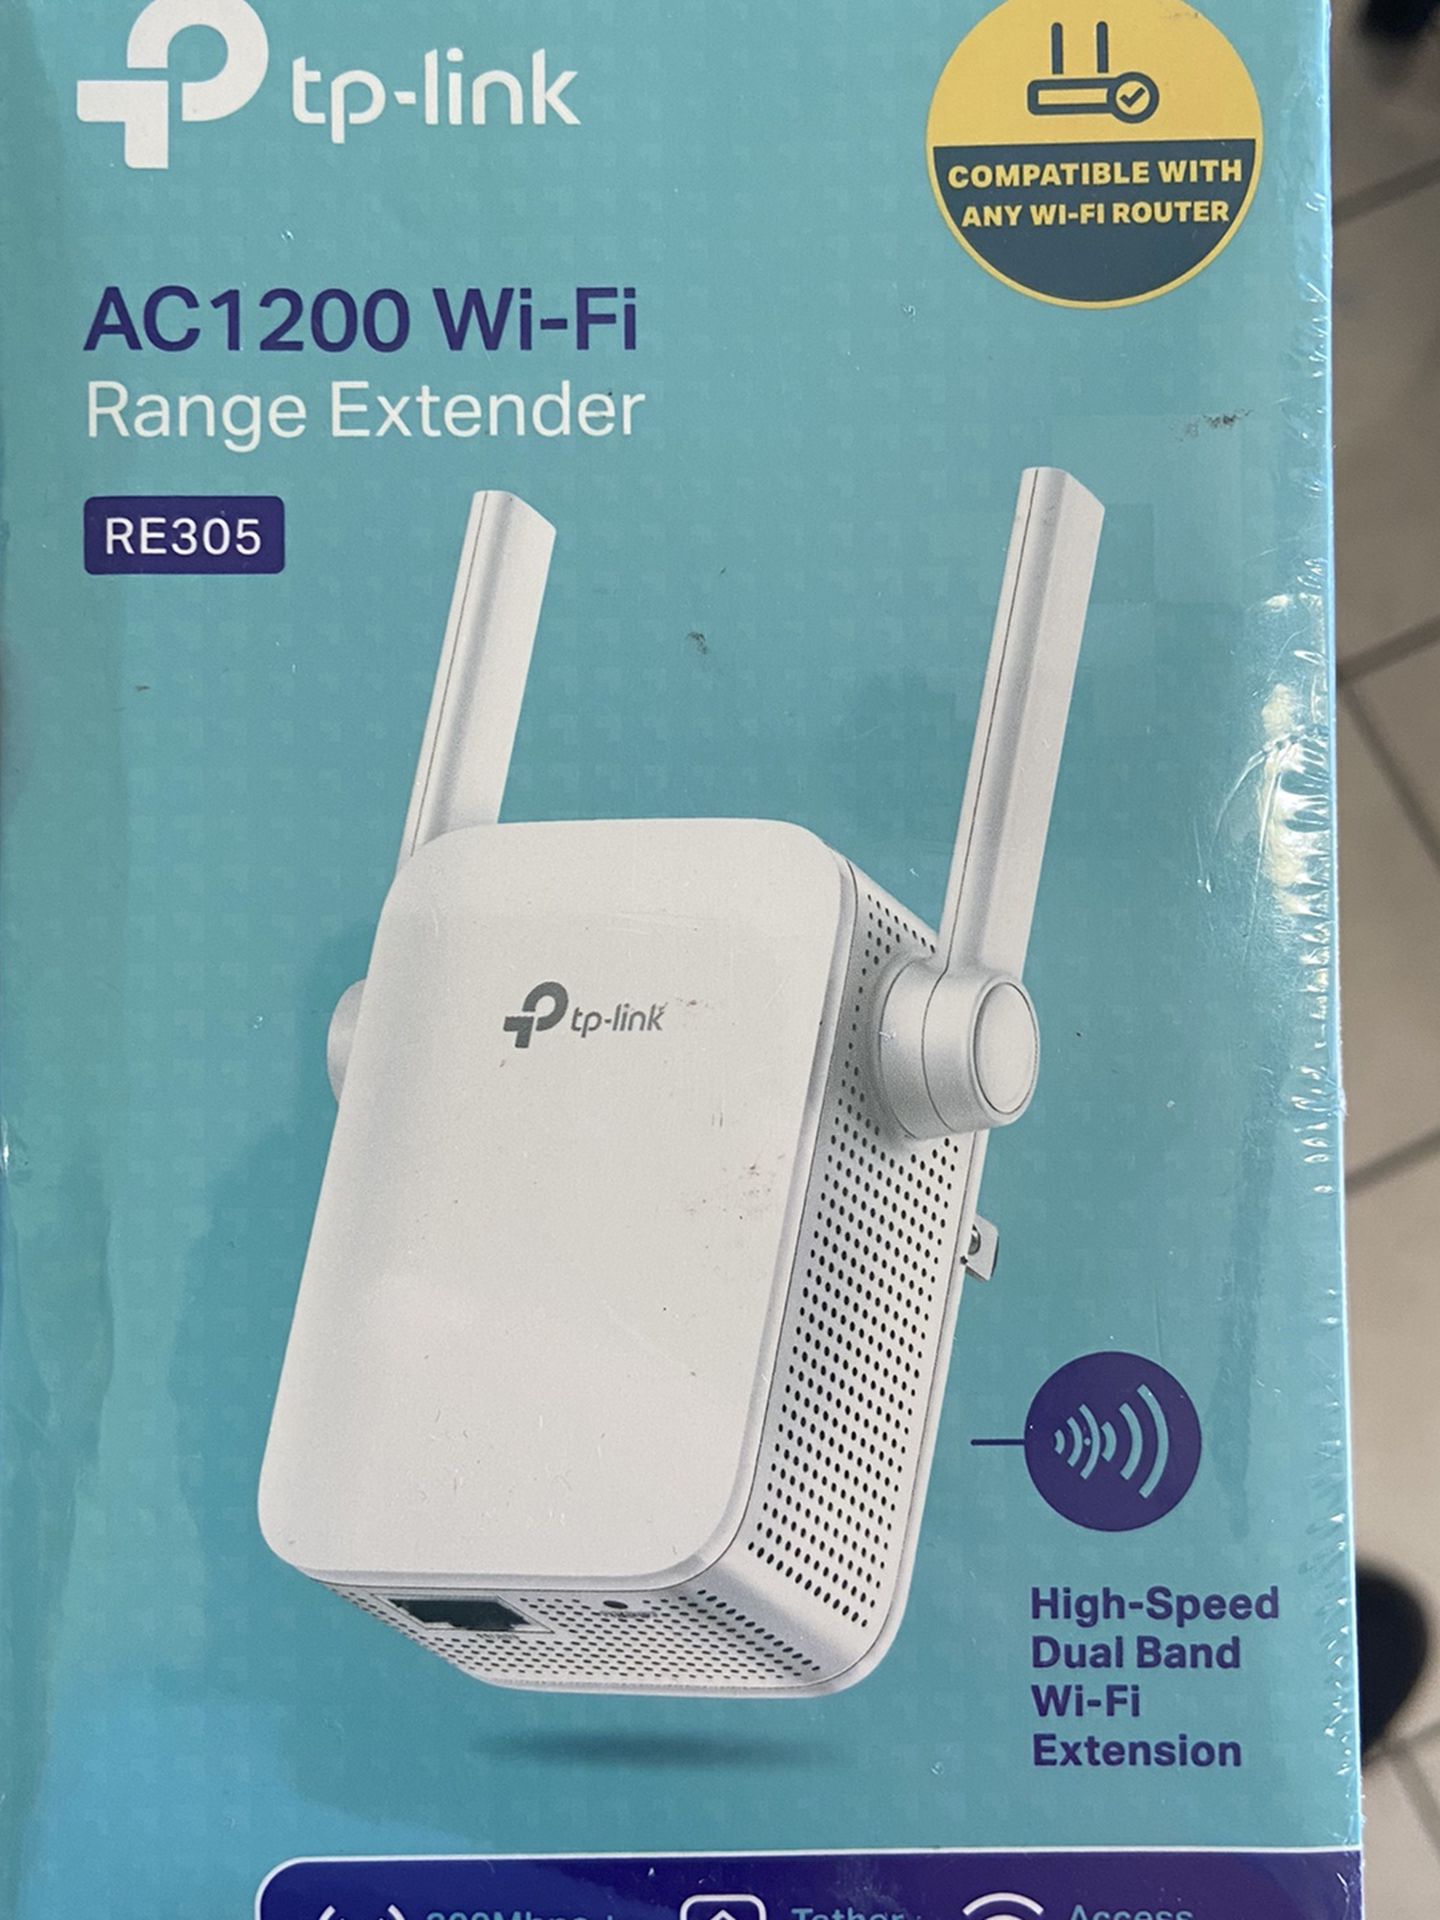 TP-Link | AC1200 WiFi Range Extender | Up to 1200Mbps | Dual Band WiFi Extender, Repeater, Wifi Signal Booster, Access Point| Easy Set-Up | Extends In